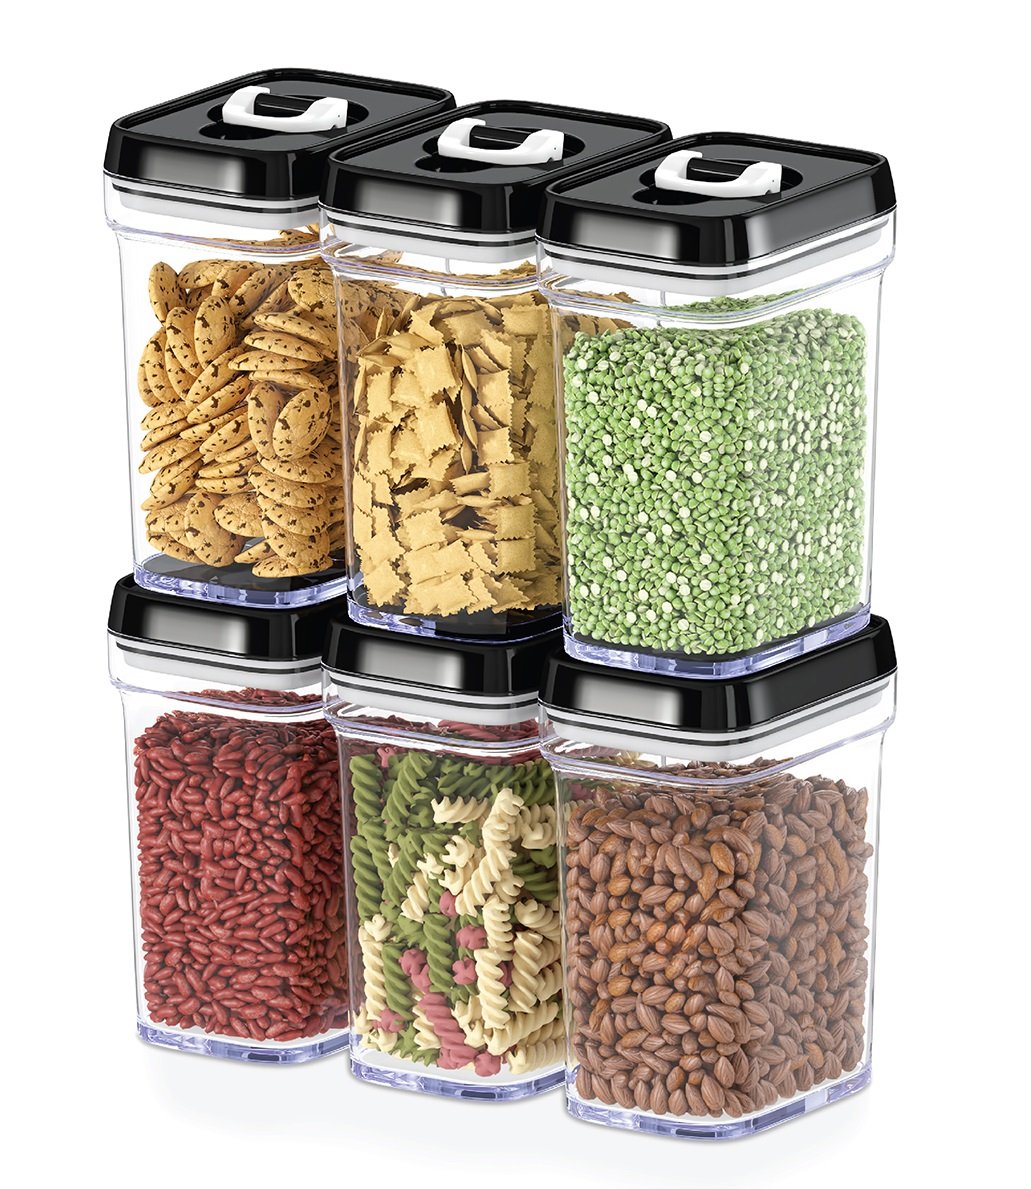 Dwellza Kitchen Airtight Food Storage Containers with Lids – 6 Piece Set/All Same Size - Air Tight Snacks Pantry & Kitchen Container - Clear Plastic BPA-Free - Keeps Food Fresh & Dry